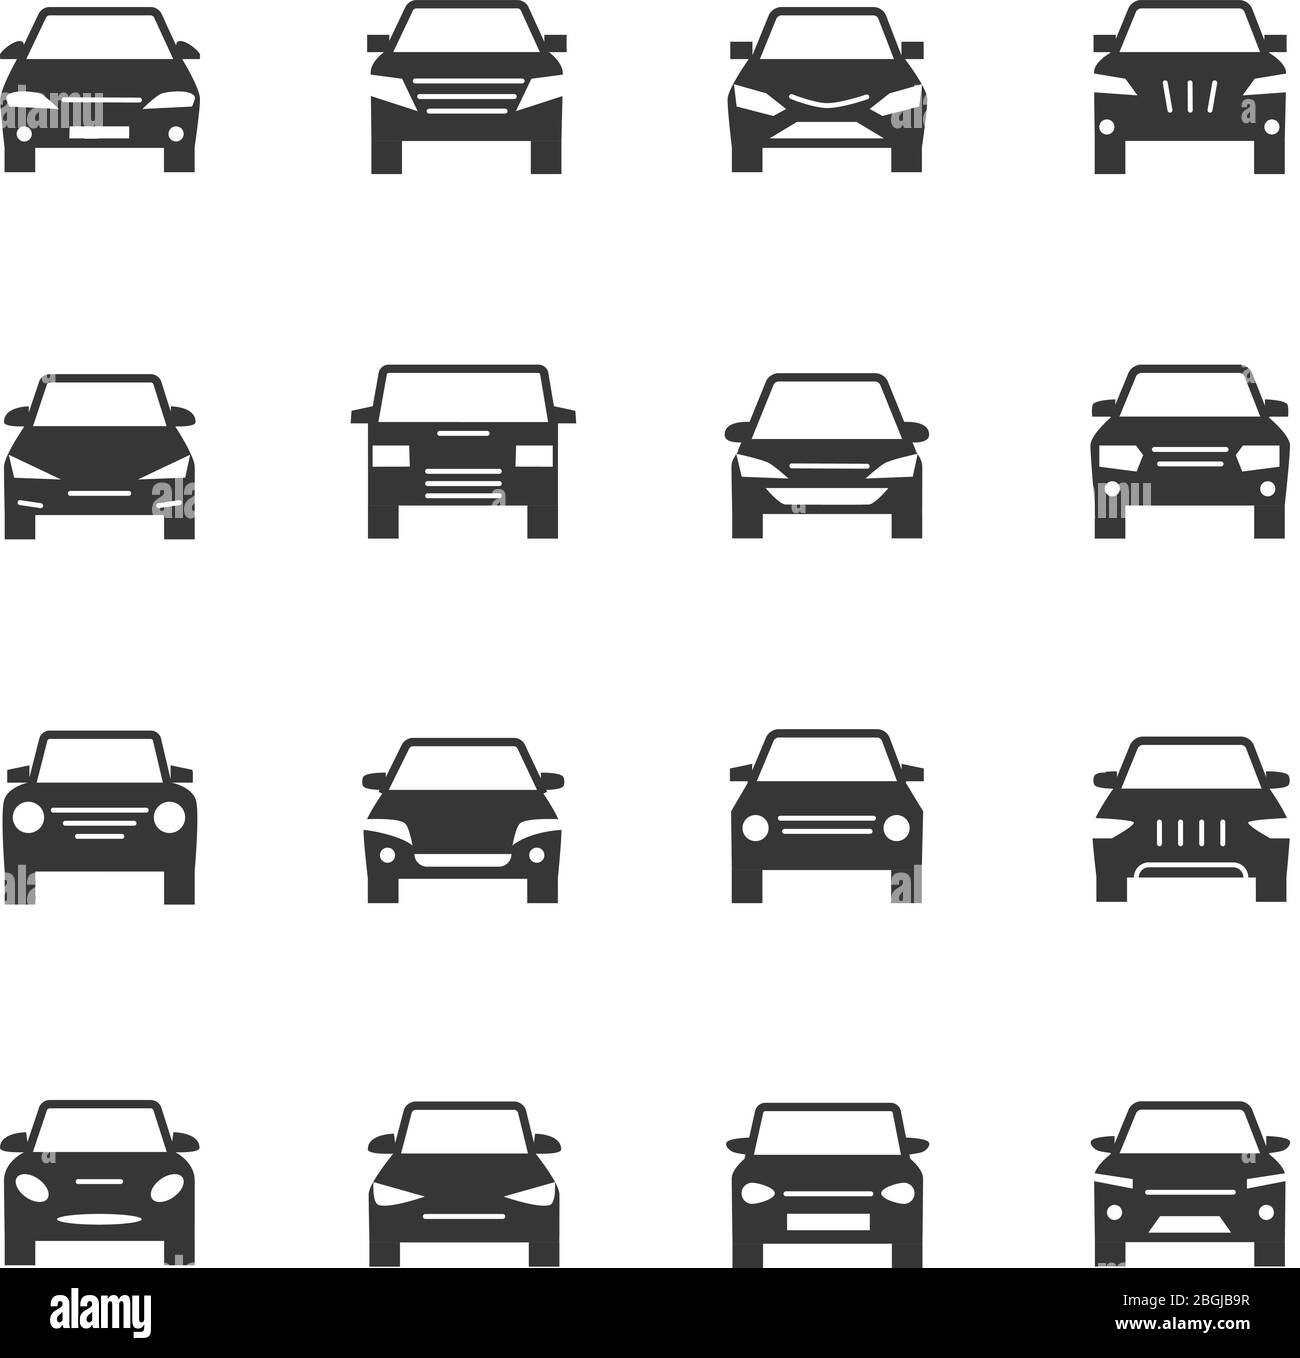 Cars Front View Signs Vehicle Black Silhouette Vector Icons Isolated On White Background Automobile Icon Auto Vehicle Symbol Illustration Stock Vector Image Art Alamy